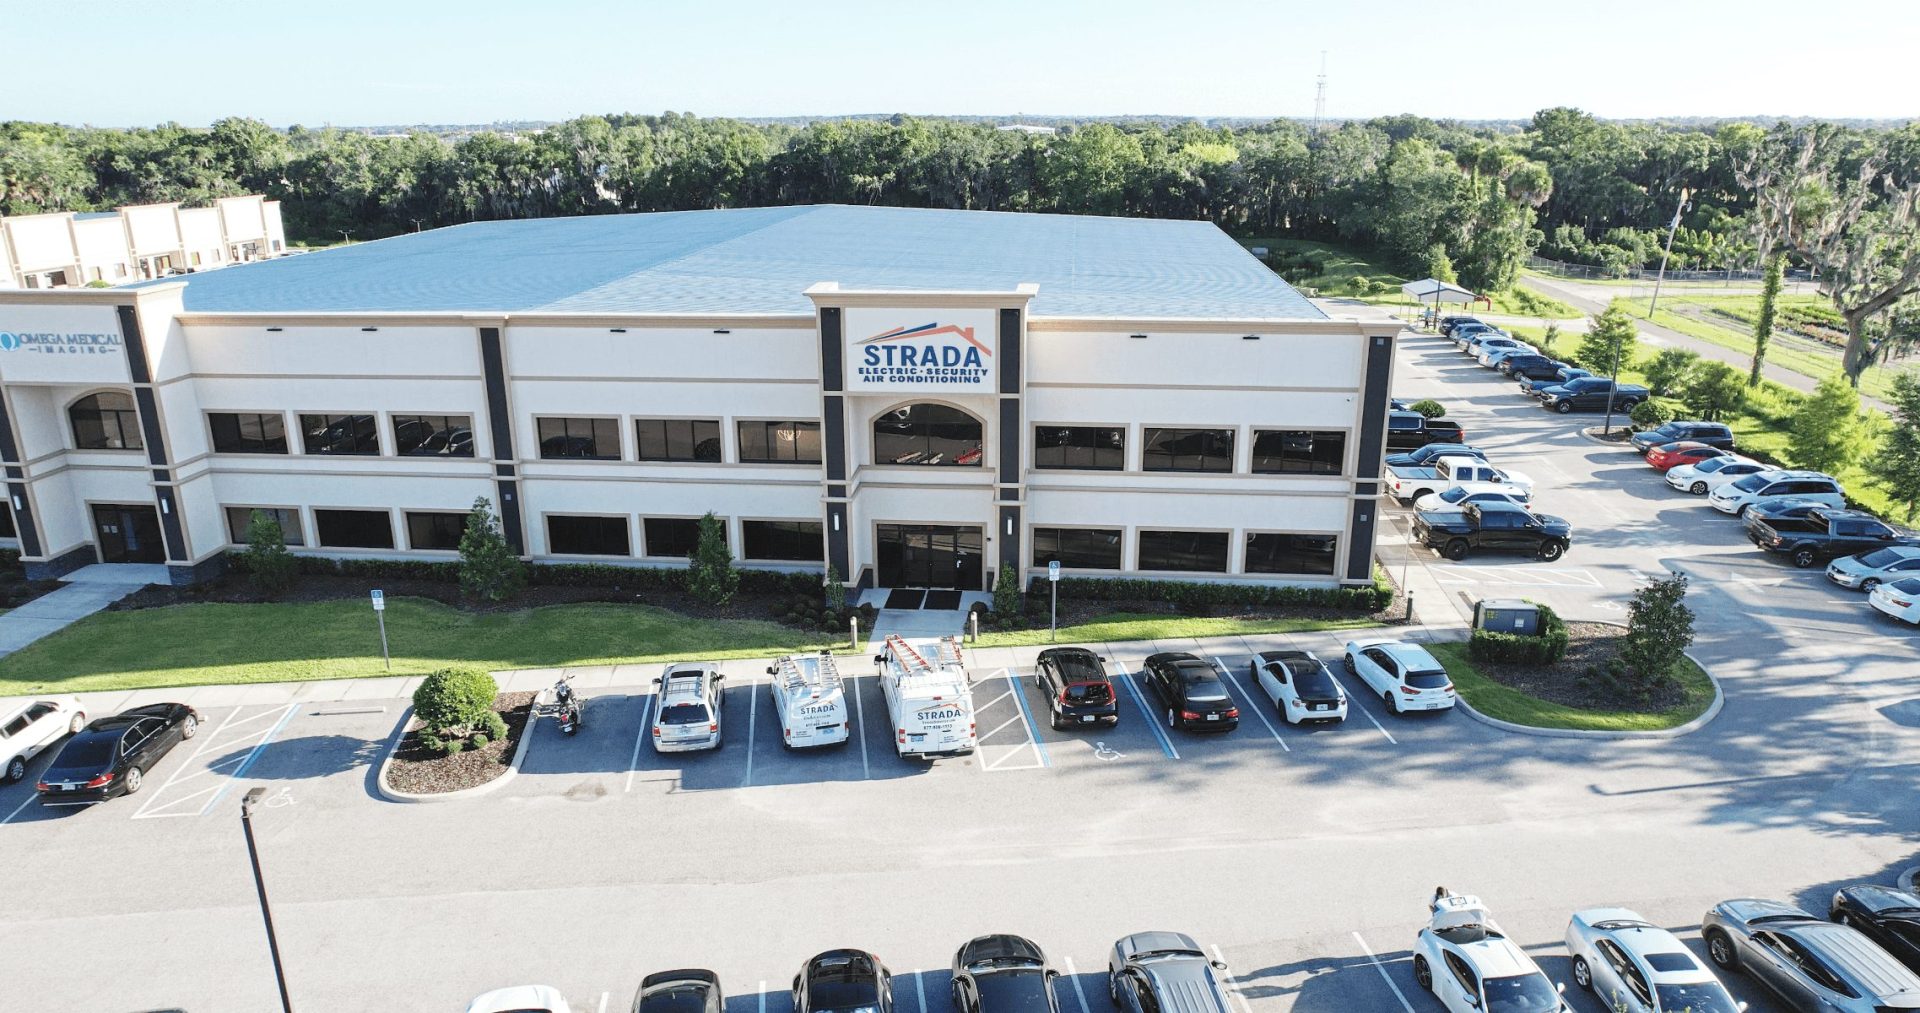 Aerial view of Strada Services building and parking lot